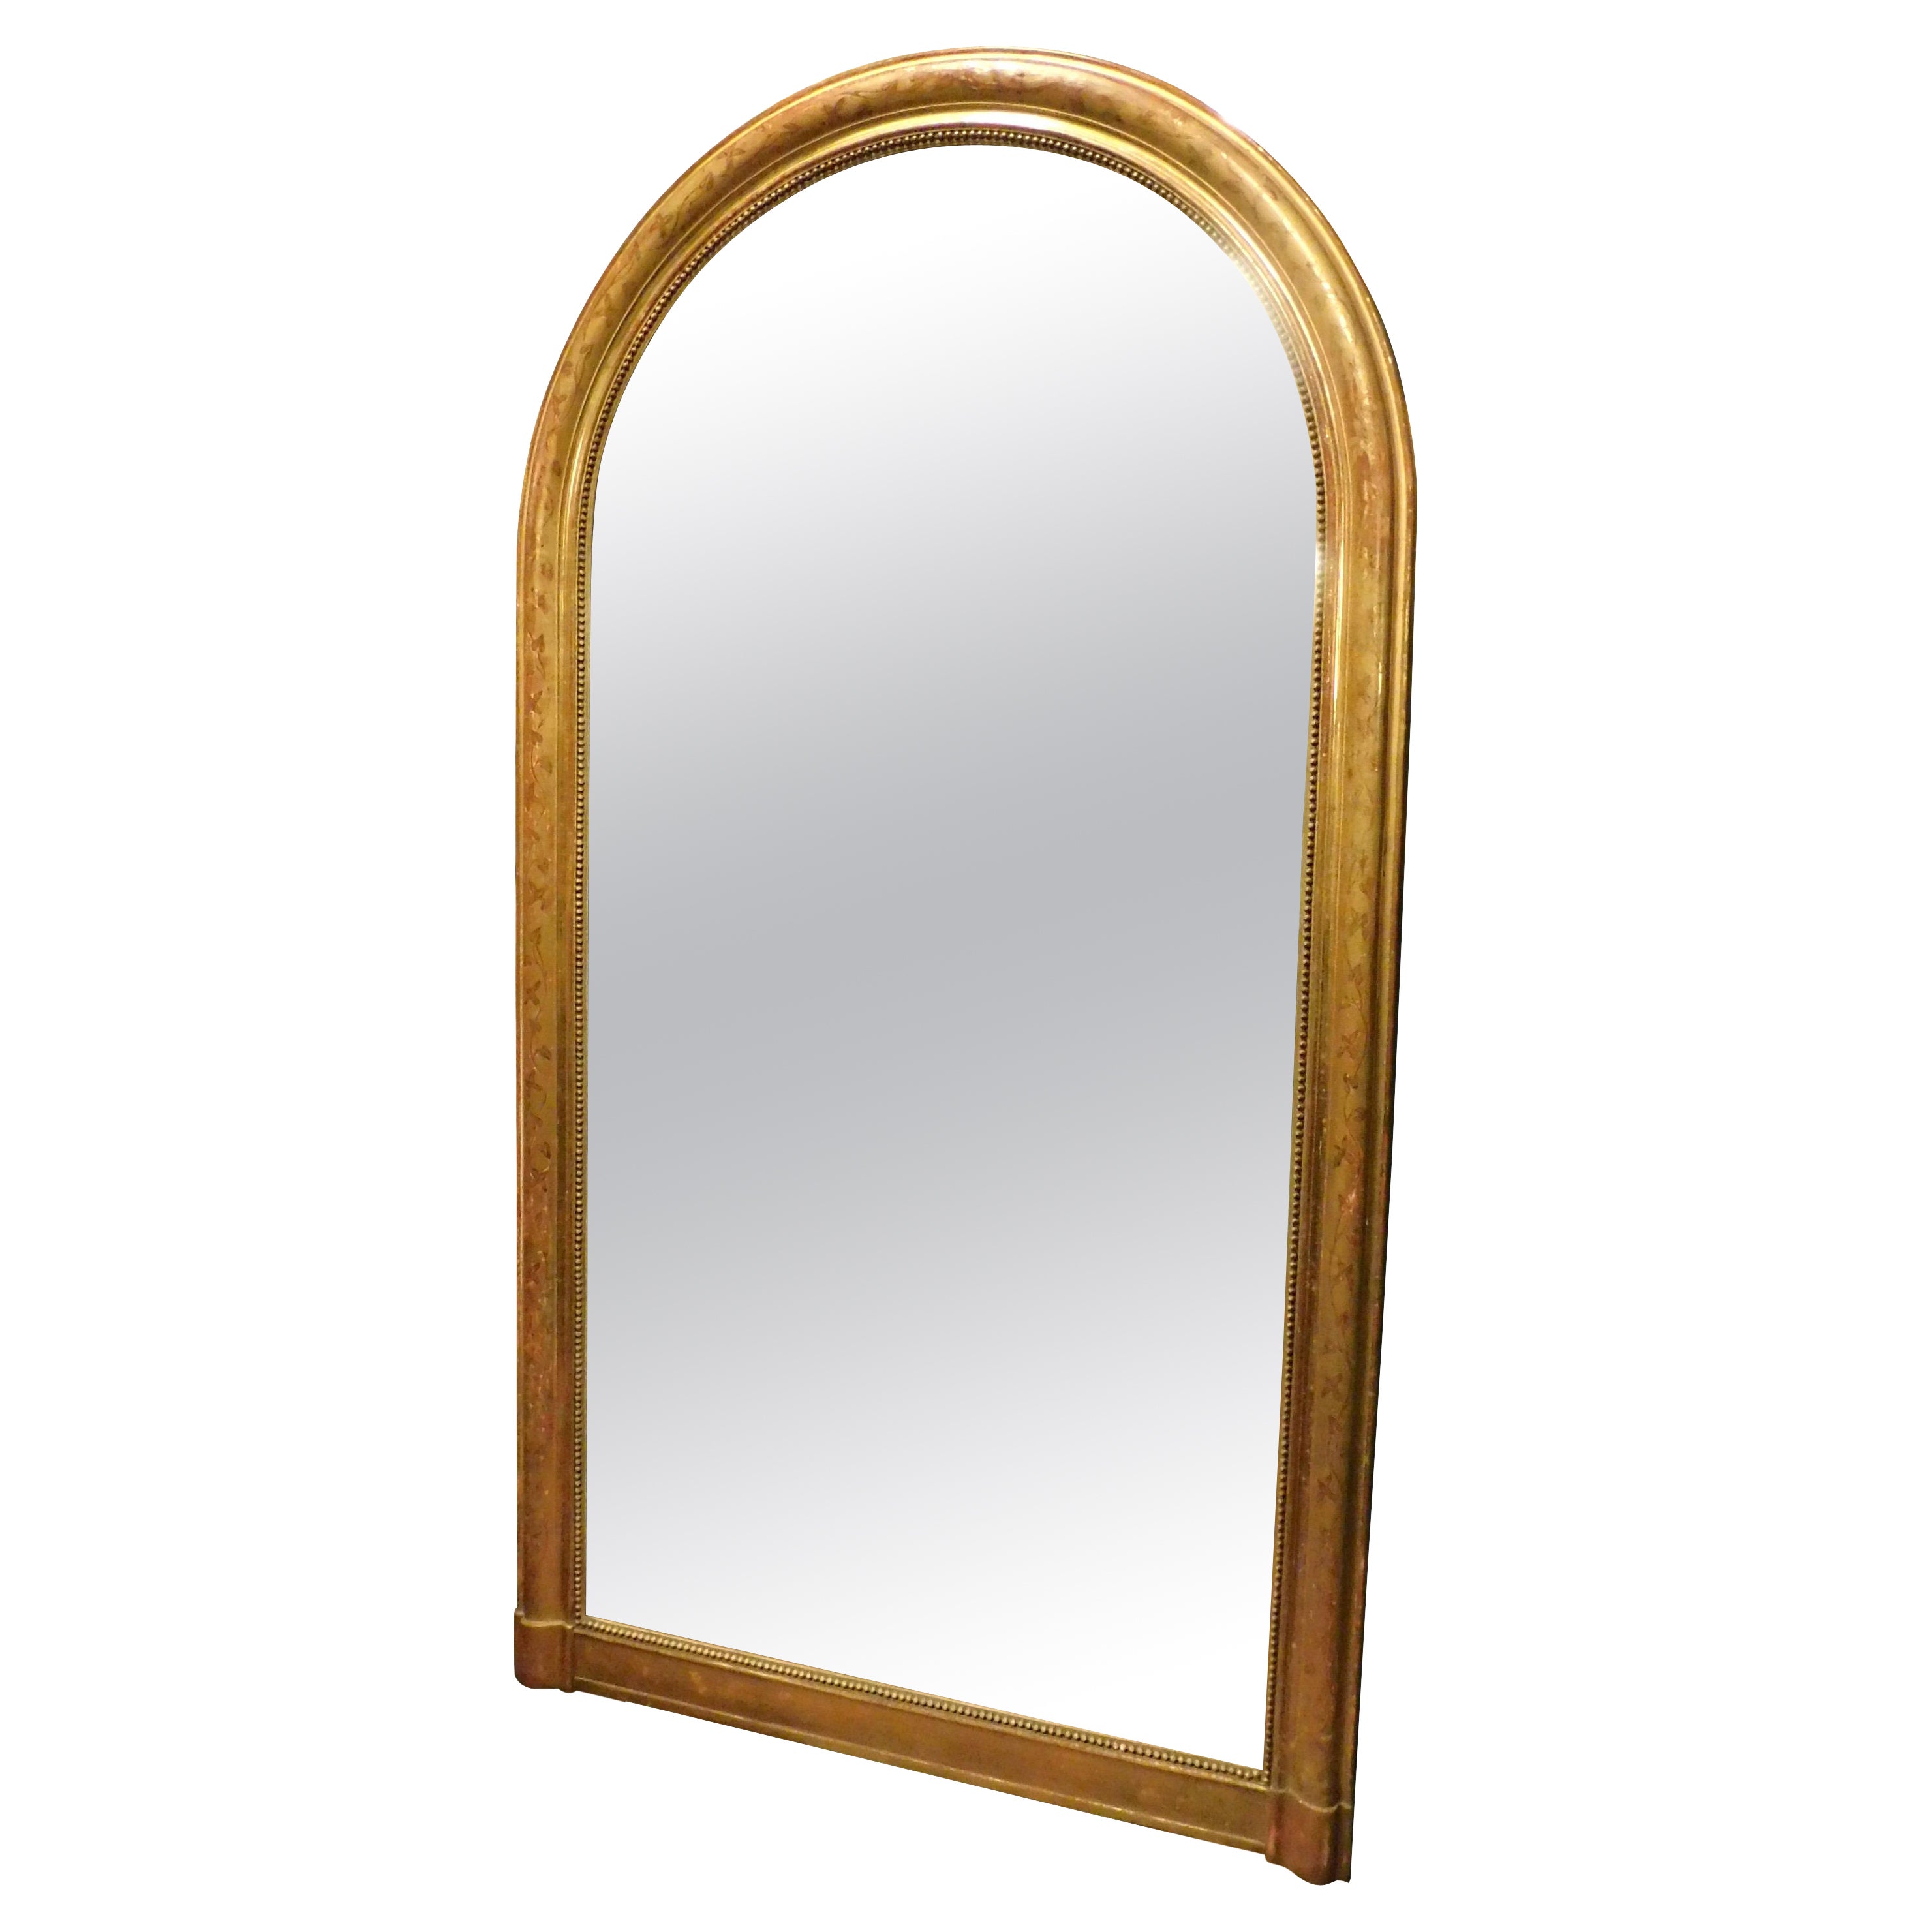 Antique Arched Mirror with Golden Frame, 19th Century Italy